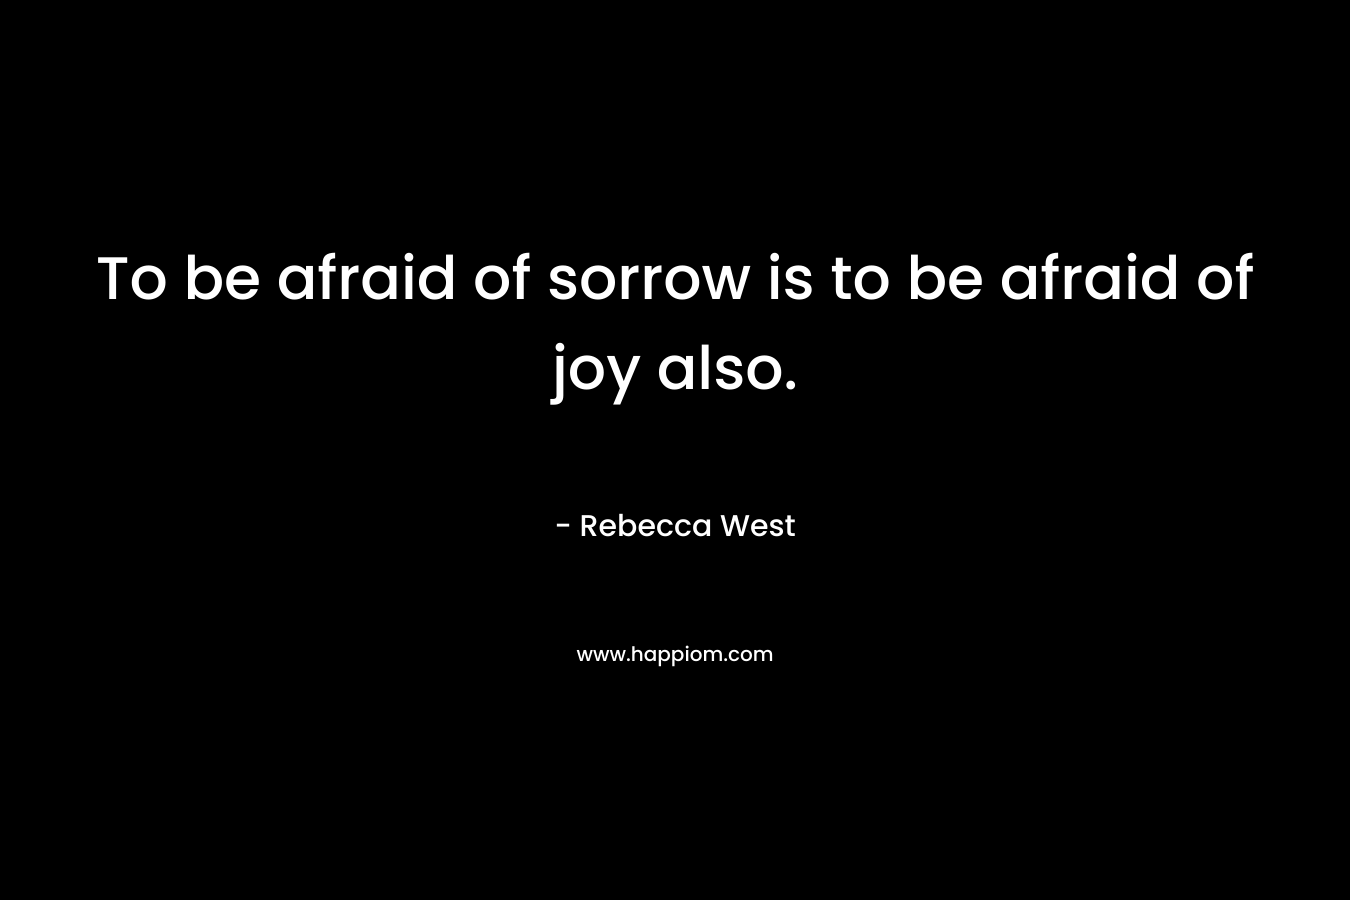 To be afraid of sorrow is to be afraid of joy also.